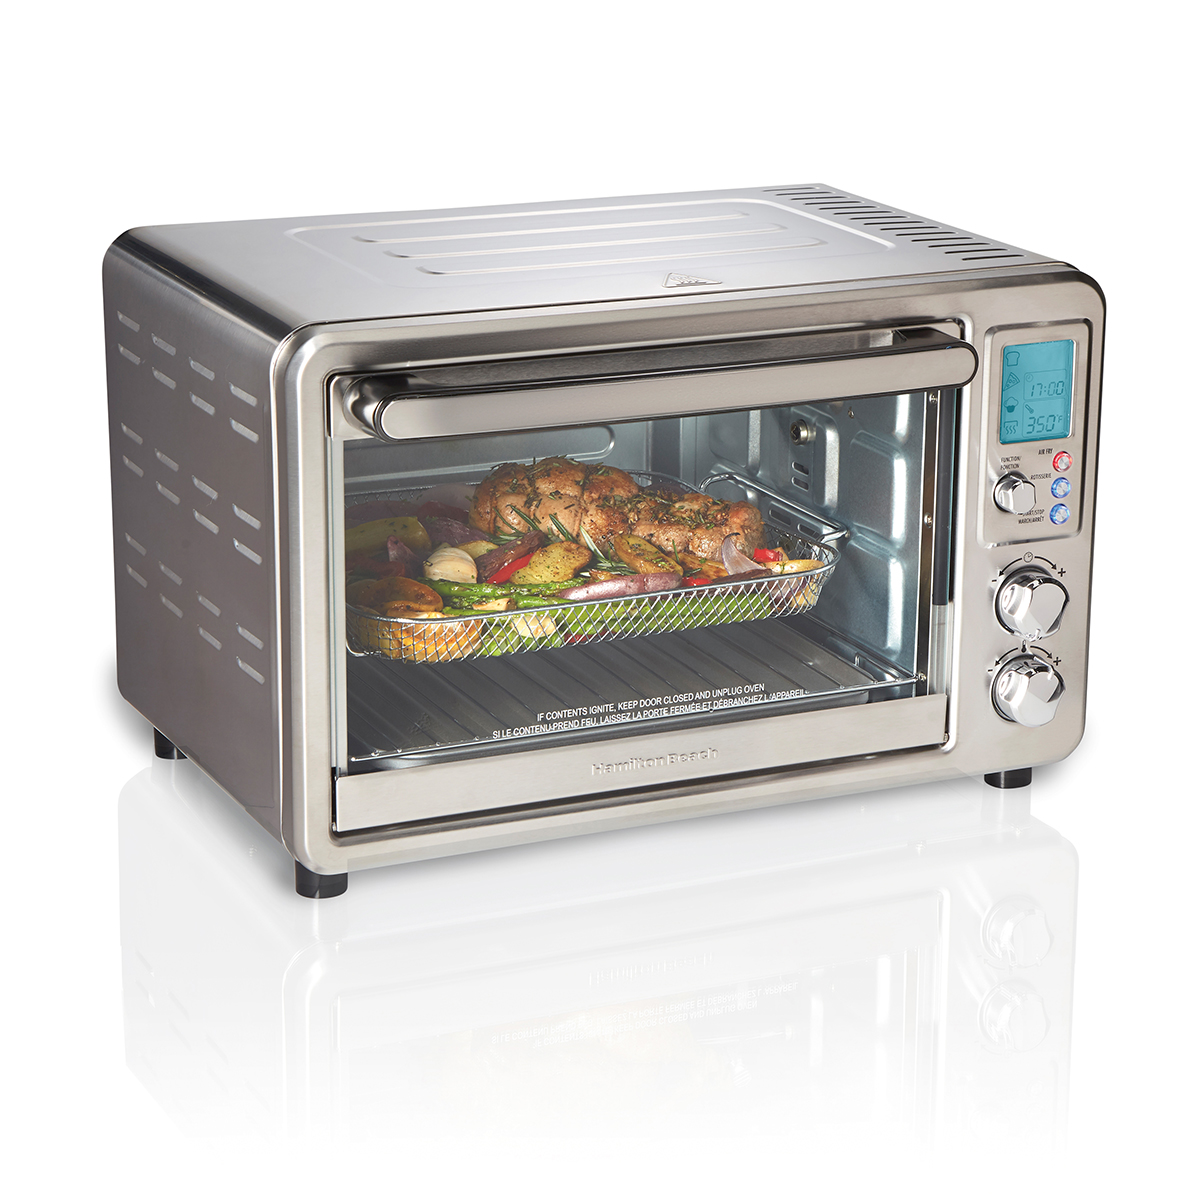 Sure-Crisp<sup>®</sup> Digital Air Fryer Toaster Oven with Rotisserie (31193)